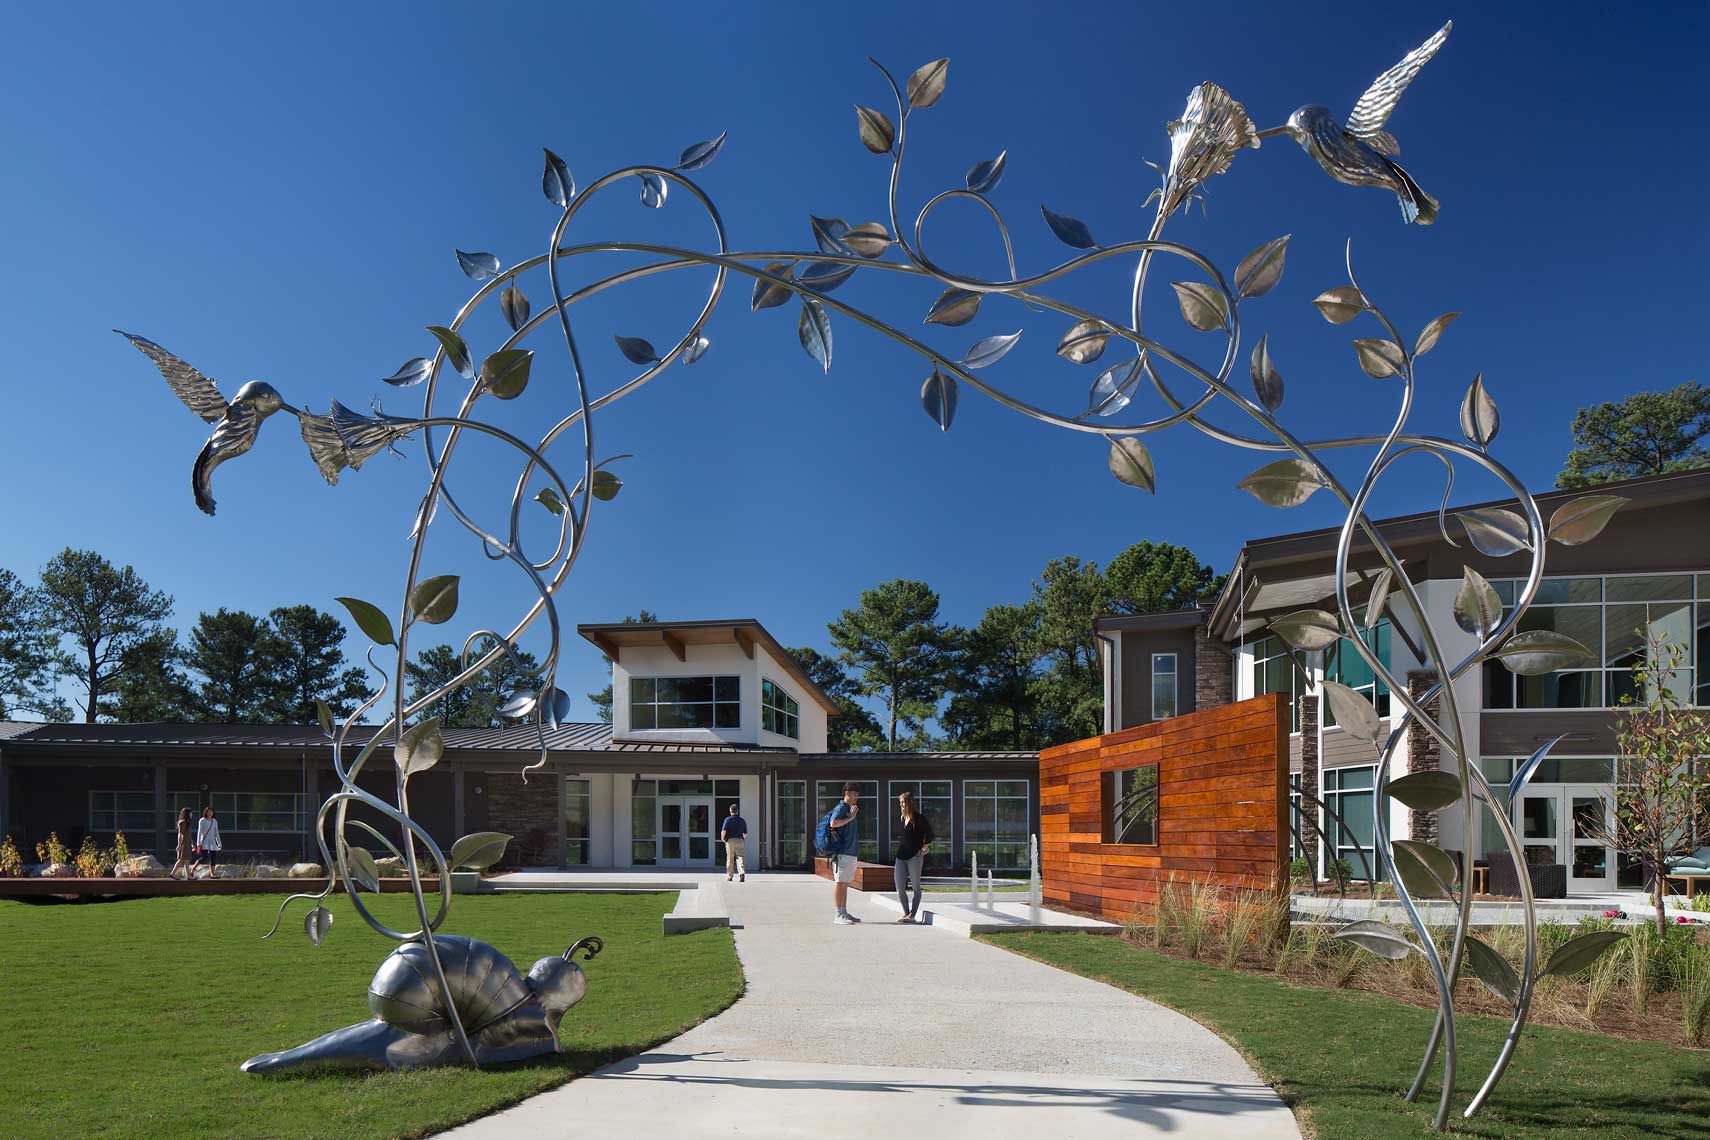 This inviting photo shows how a sculpture as a canopy delights visitors to at Skyland Trail